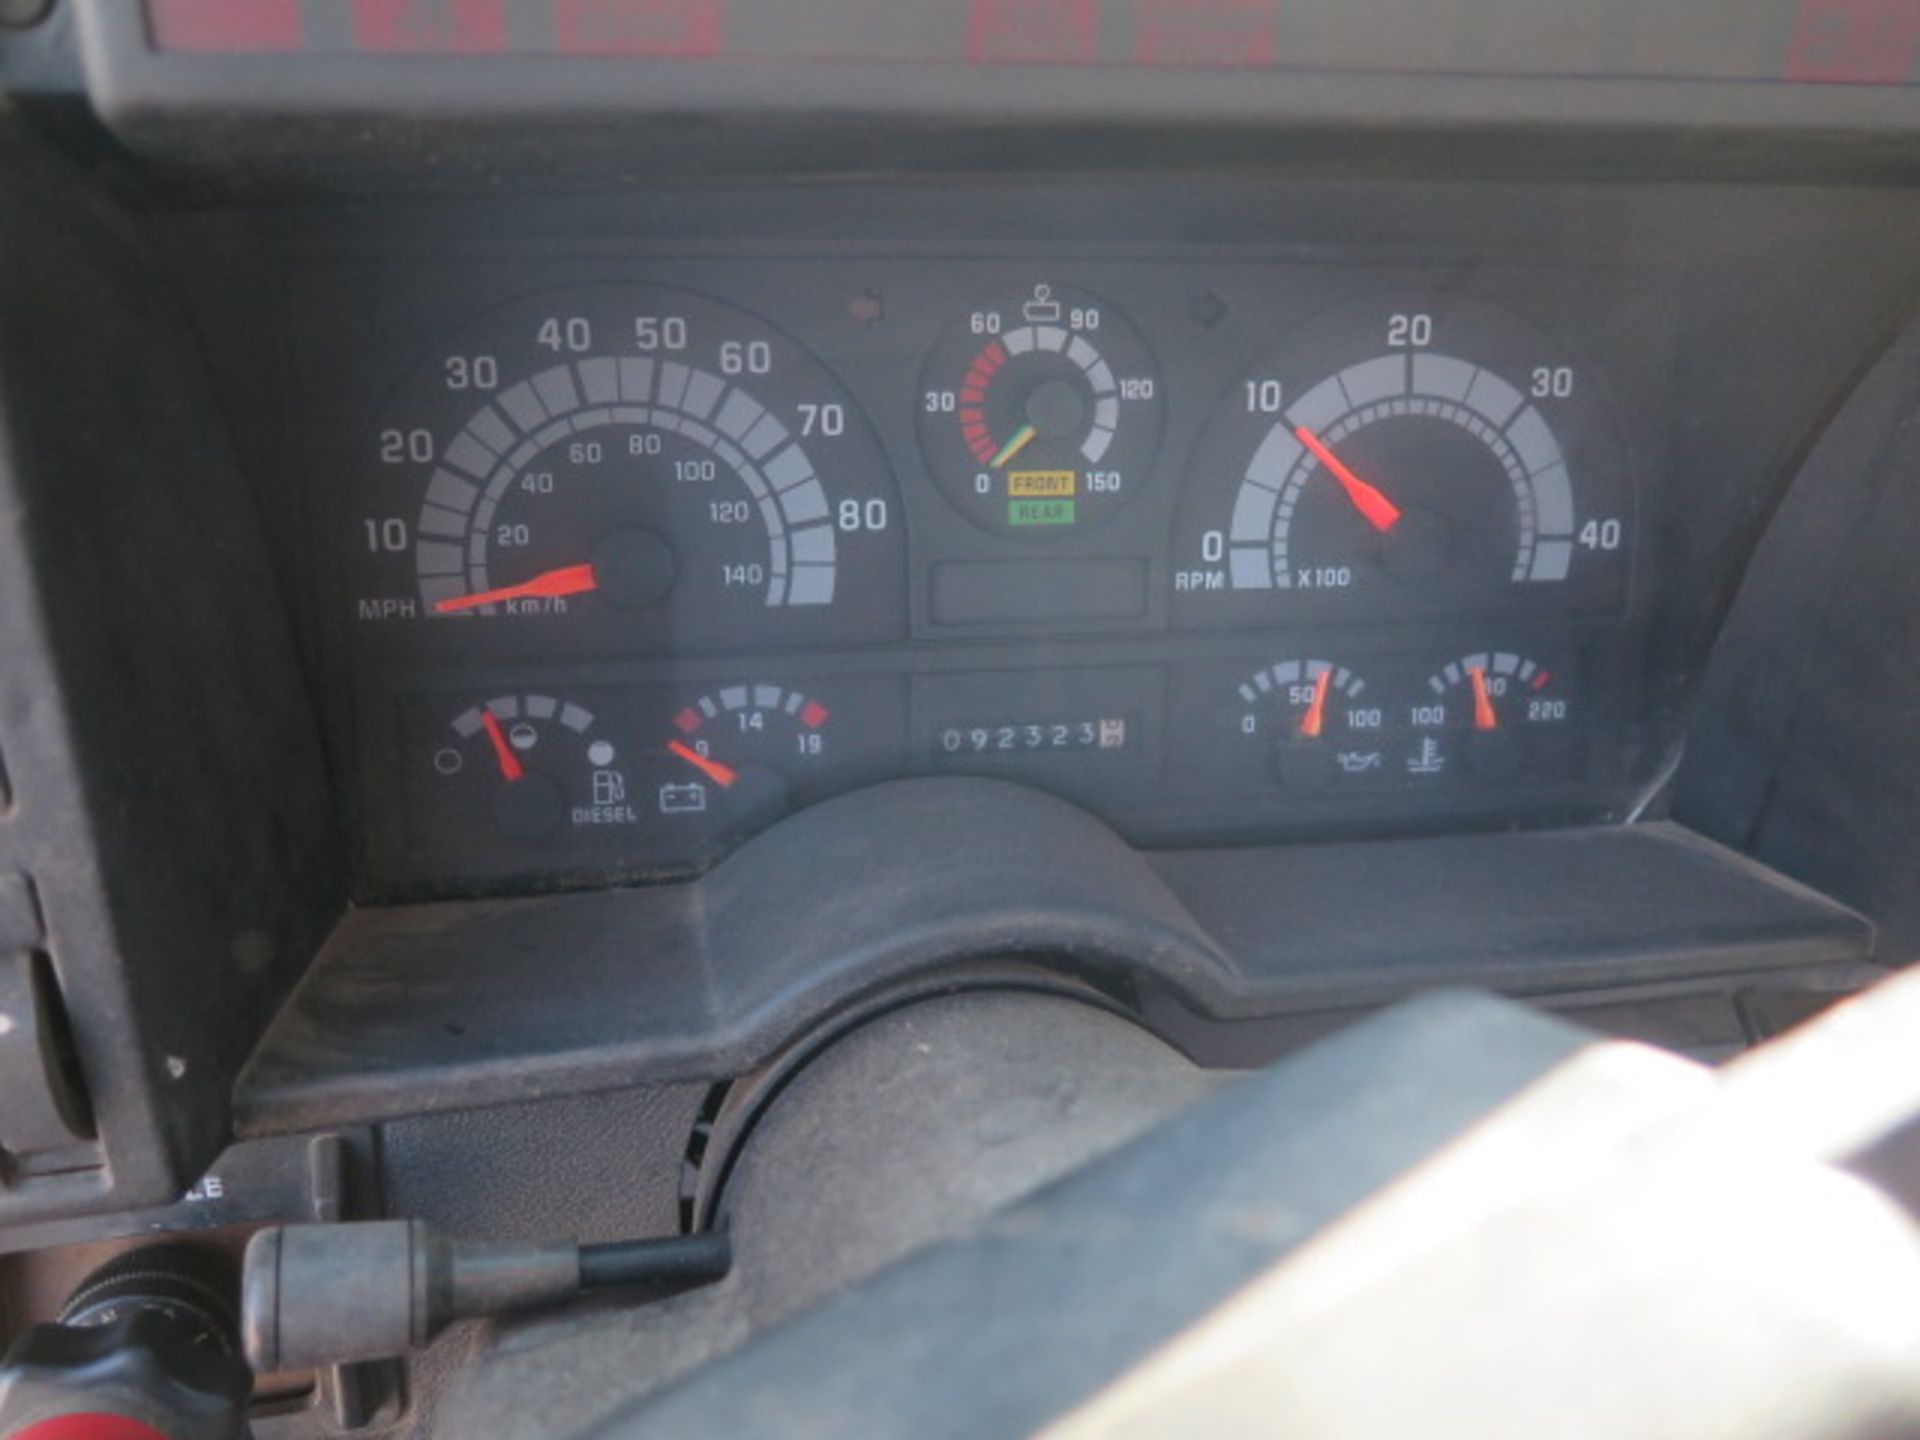 1992 GMC Top Kick Service Truck Lisc# 4J61885 w/ Caterpillar Diesel Engine, Automatic, SOLD AS IS - Image 20 of 24